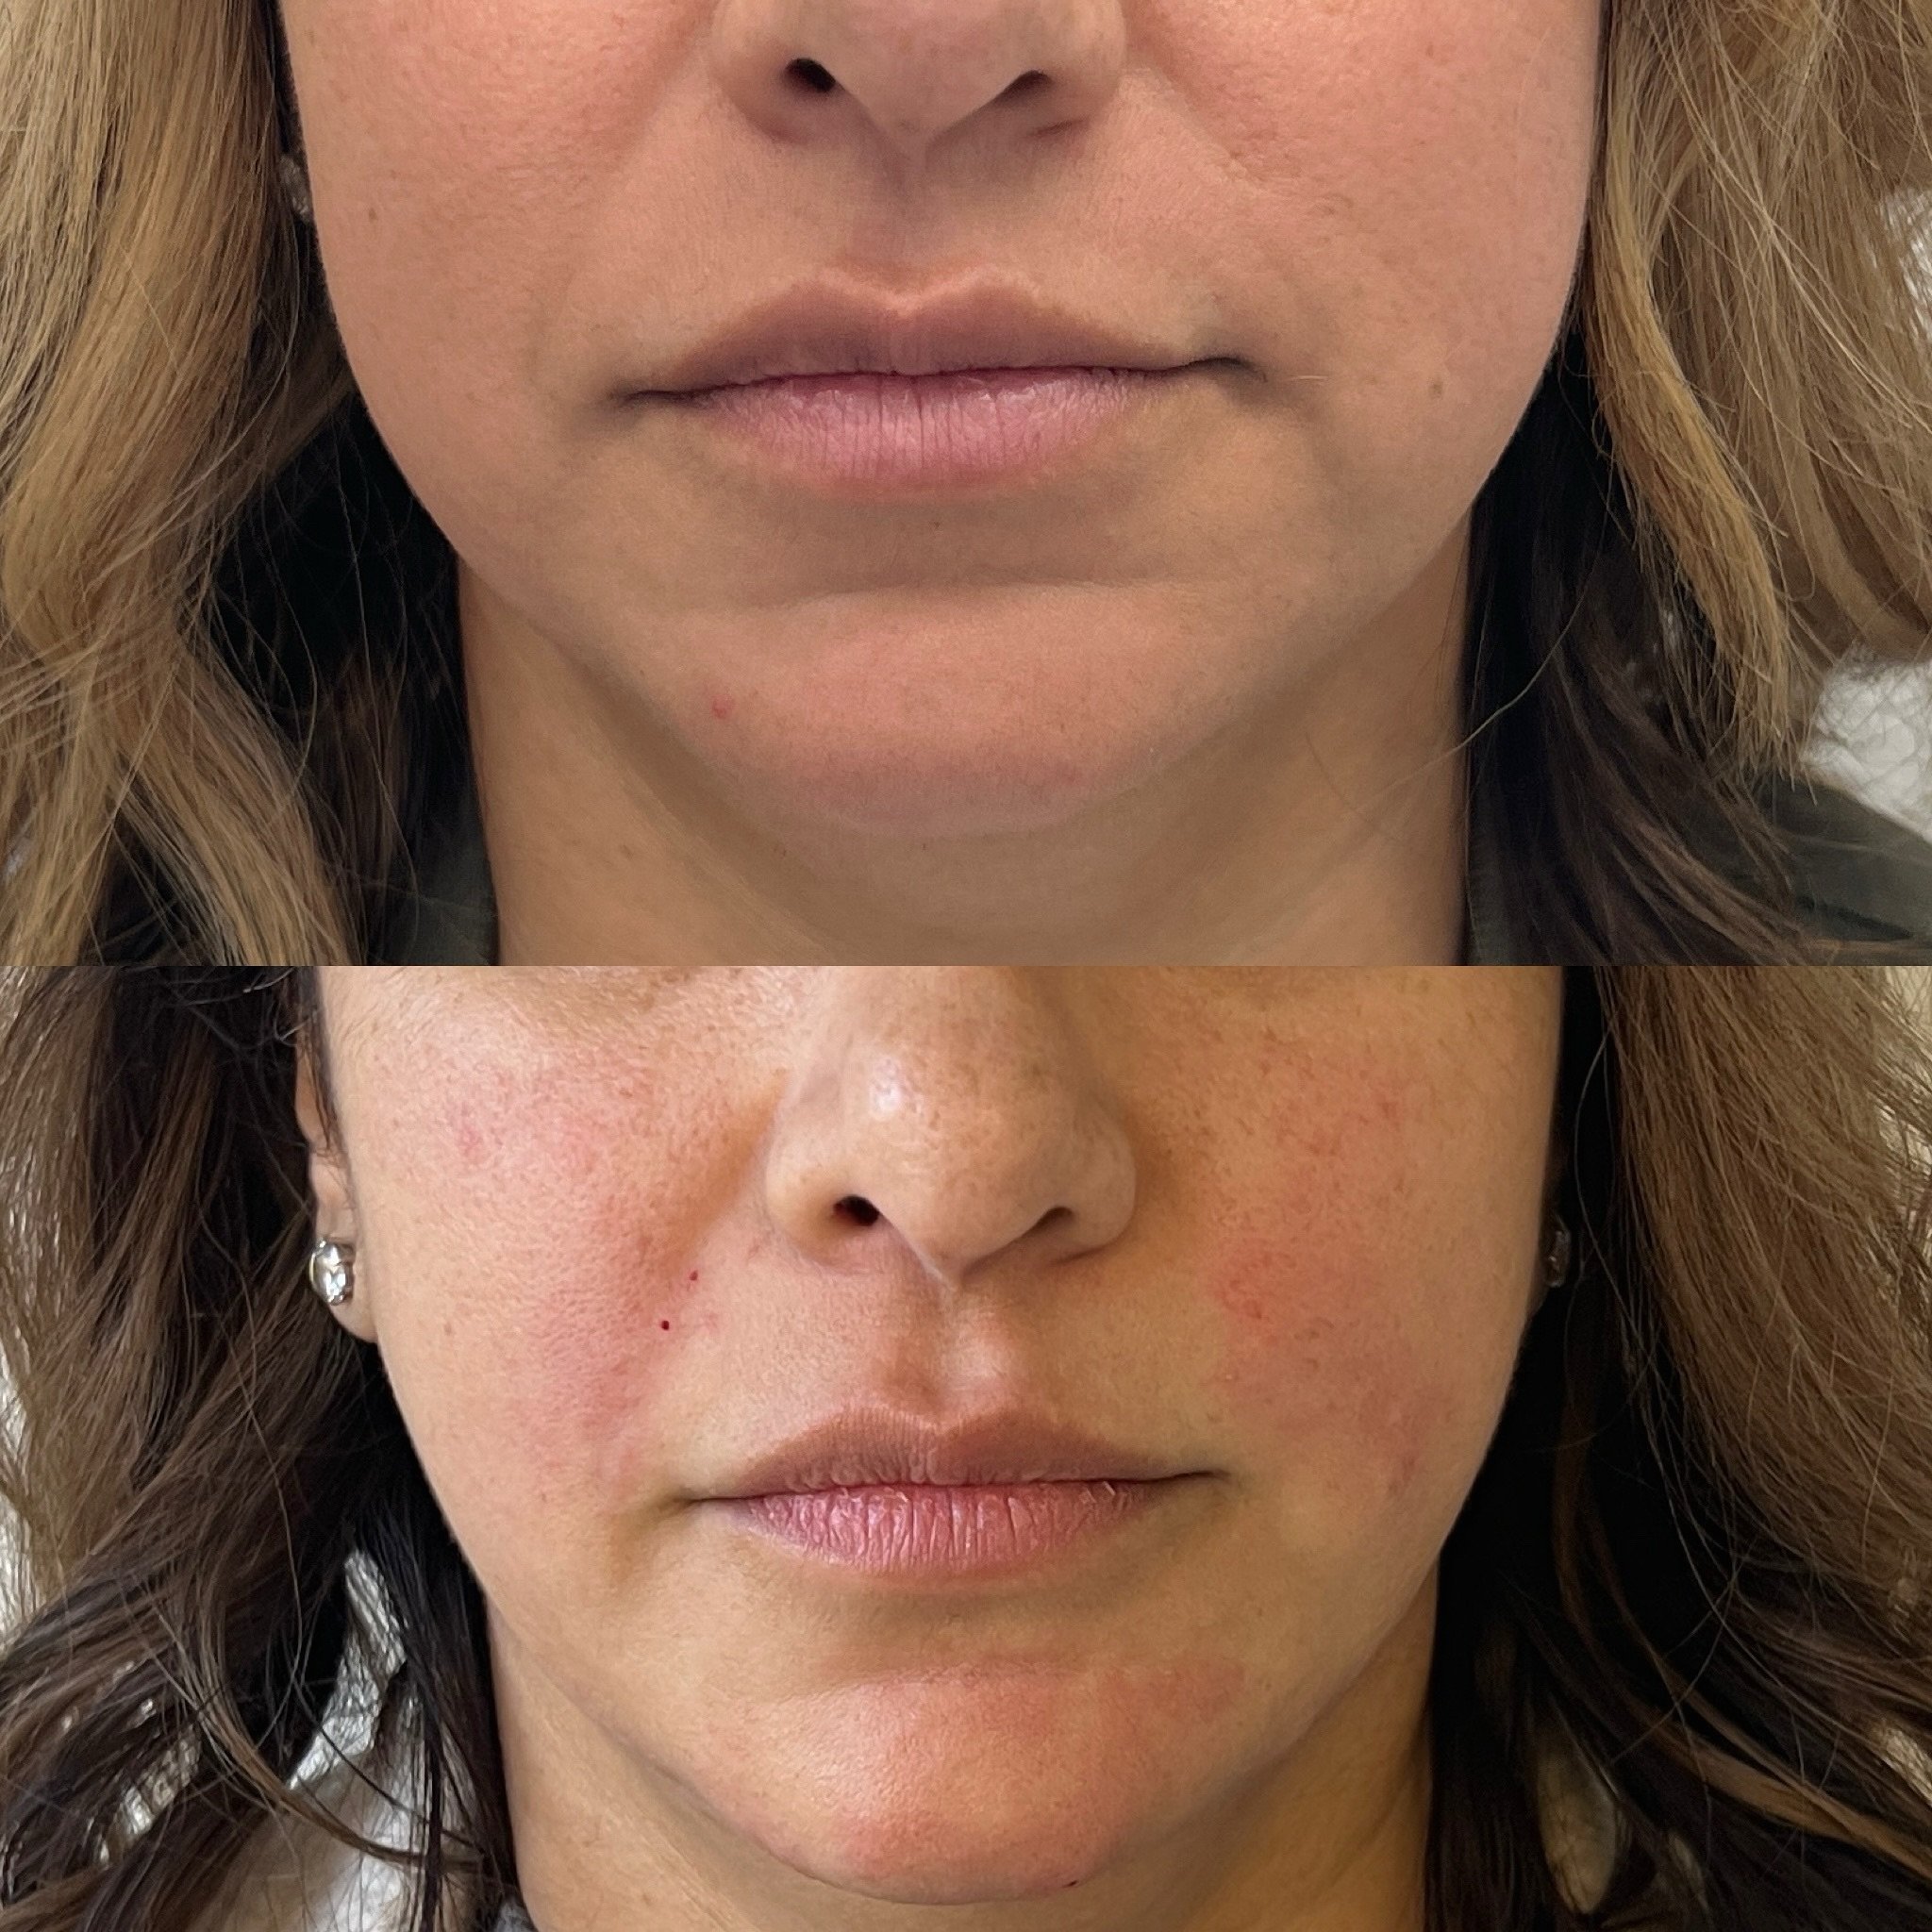 Lower face balancing with dermal fillers. We added a small amount of filler to the nasolabial folds (very superficially) and chin/chin shadow/jawline to let her natural beauty shine! This completed a full facial balancing treatment plan that also inc